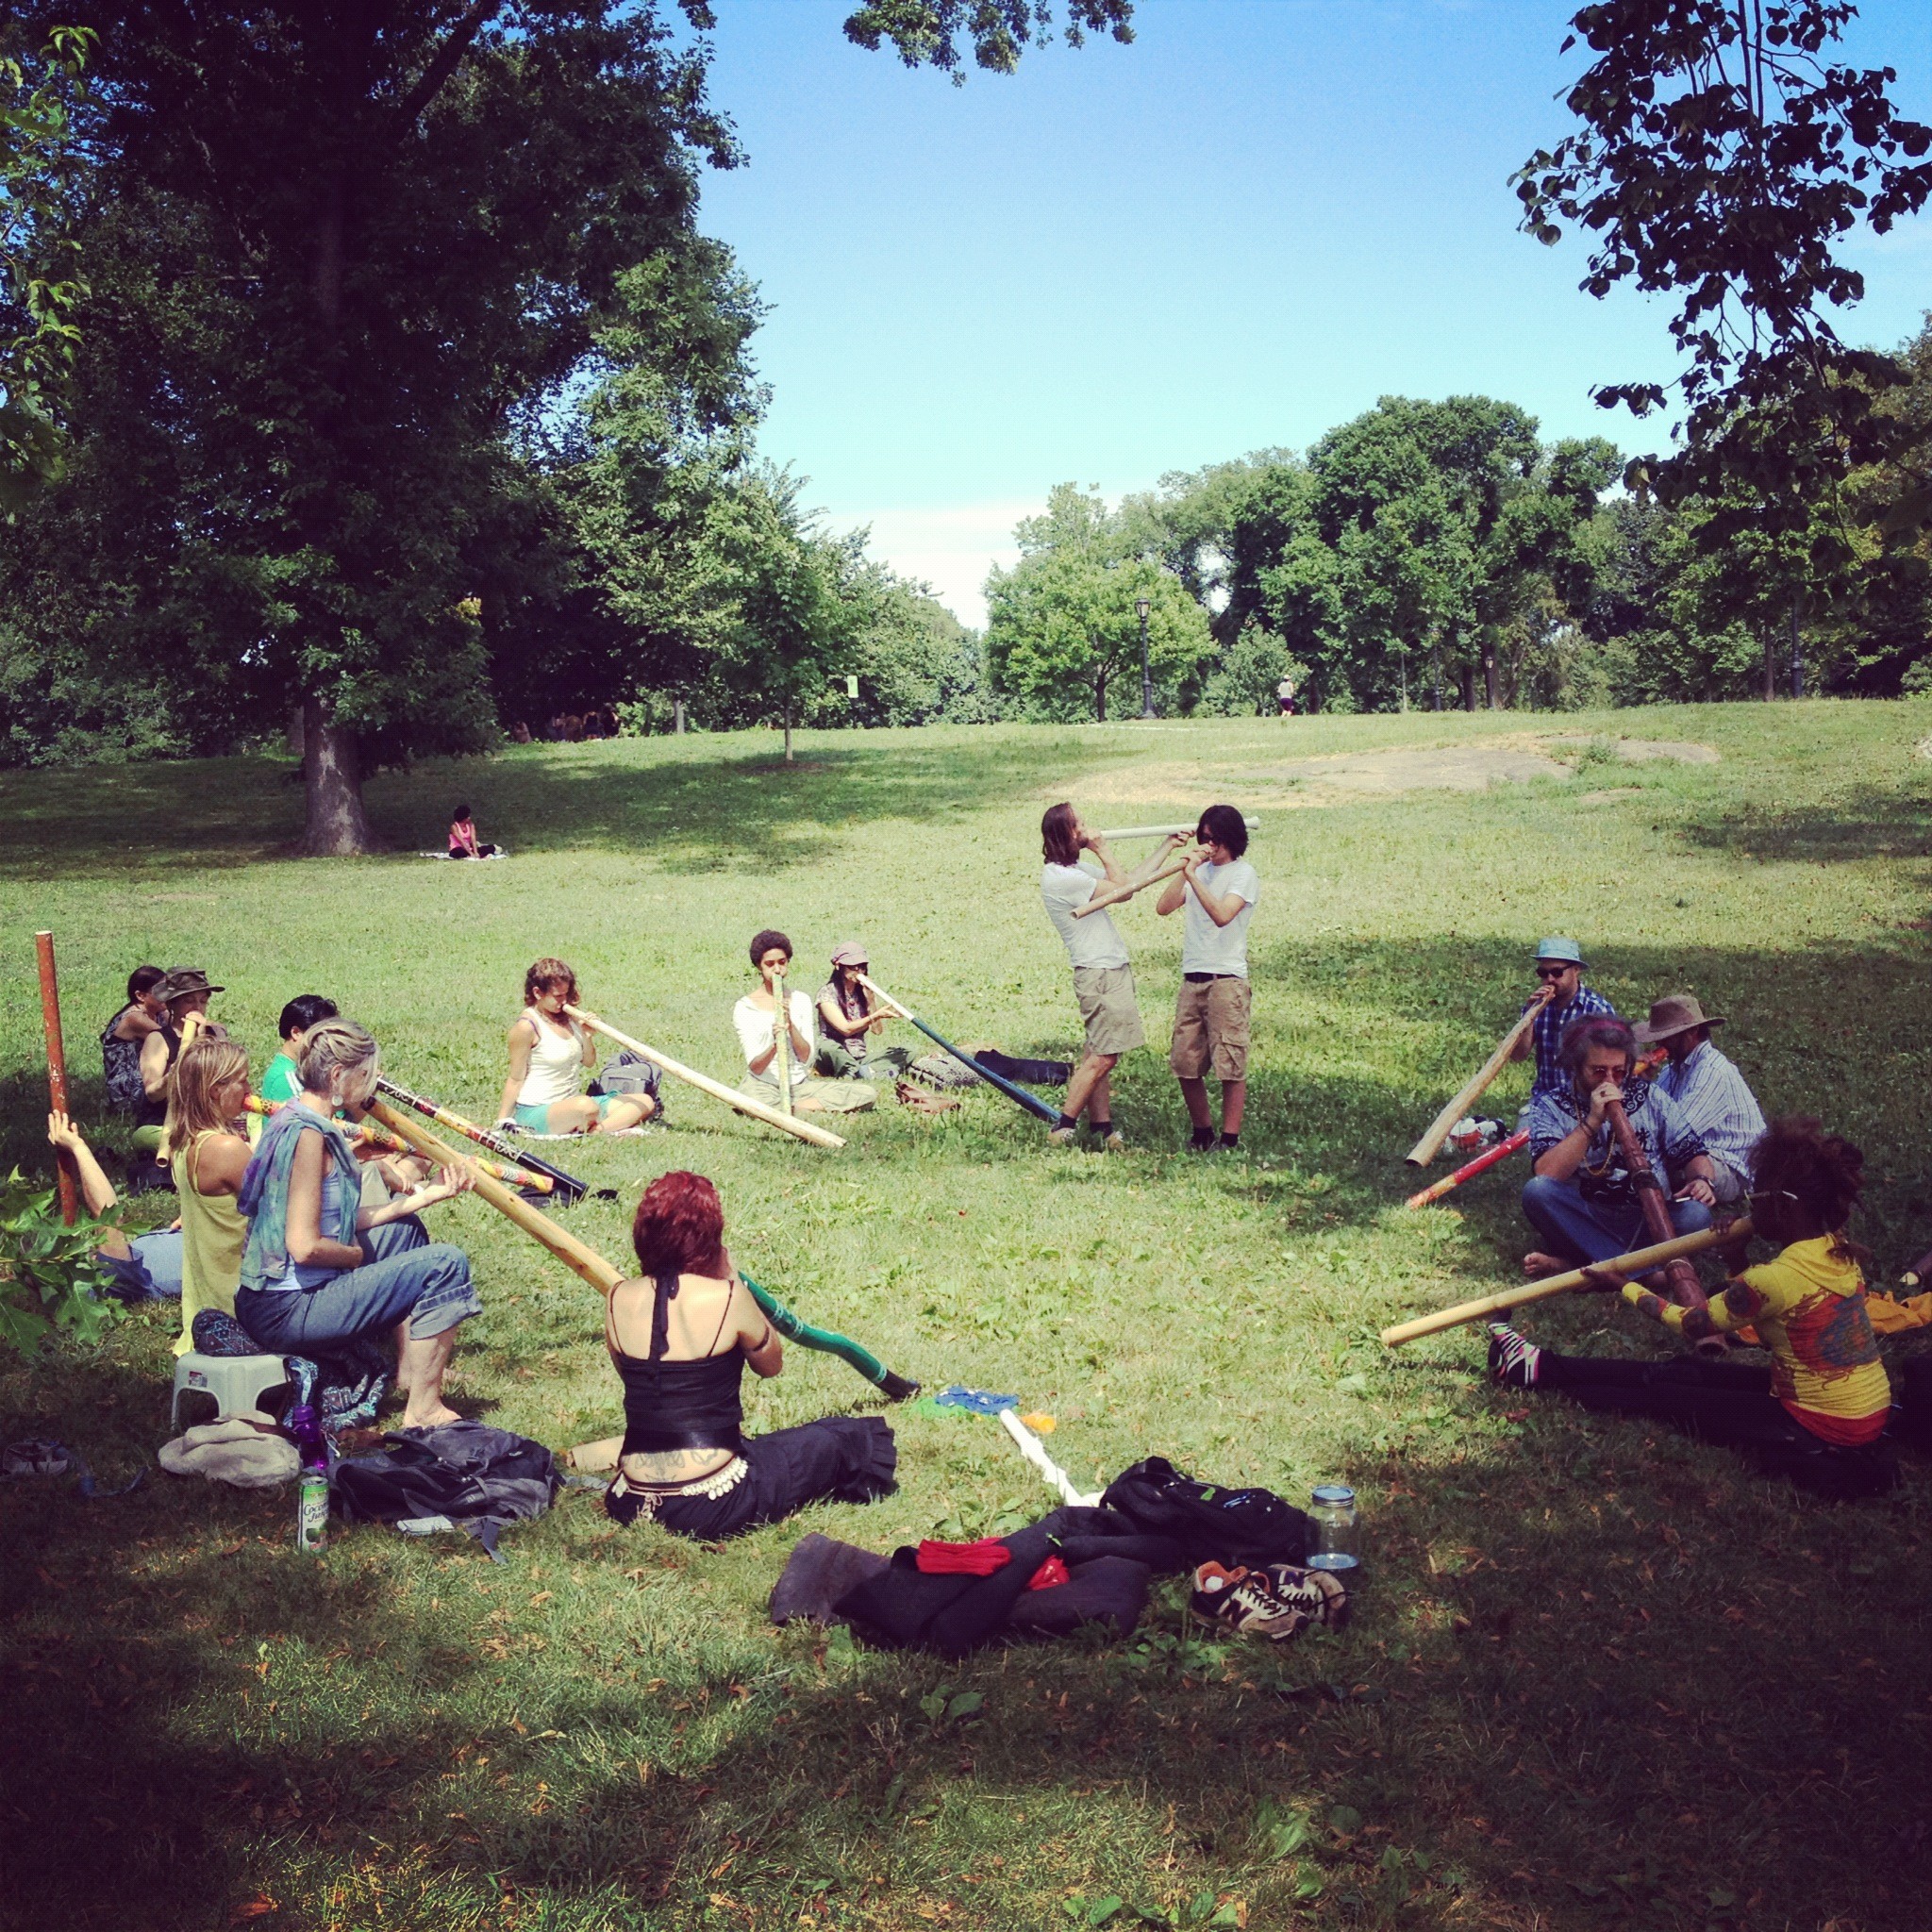 Didgeridoo Class, Lessons, Programs, Courses in New York City's Central Park, San Francisco, Los Angeles, Connecticut